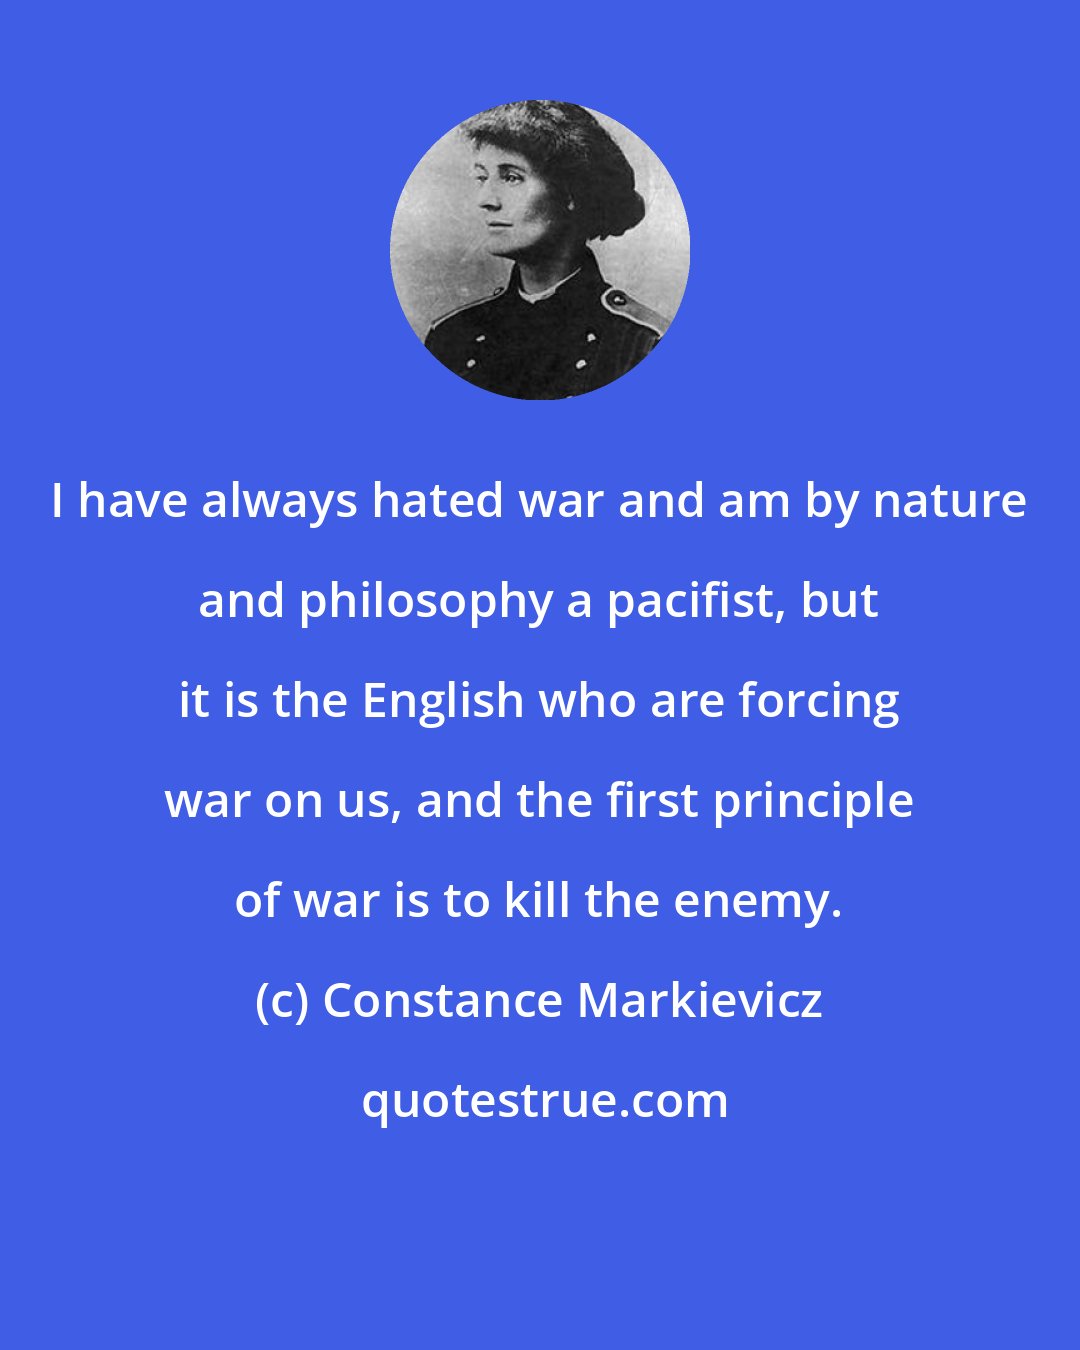 Constance Markievicz: I have always hated war and am by nature and philosophy a pacifist, but it is the English who are forcing war on us, and the first principle of war is to kill the enemy.